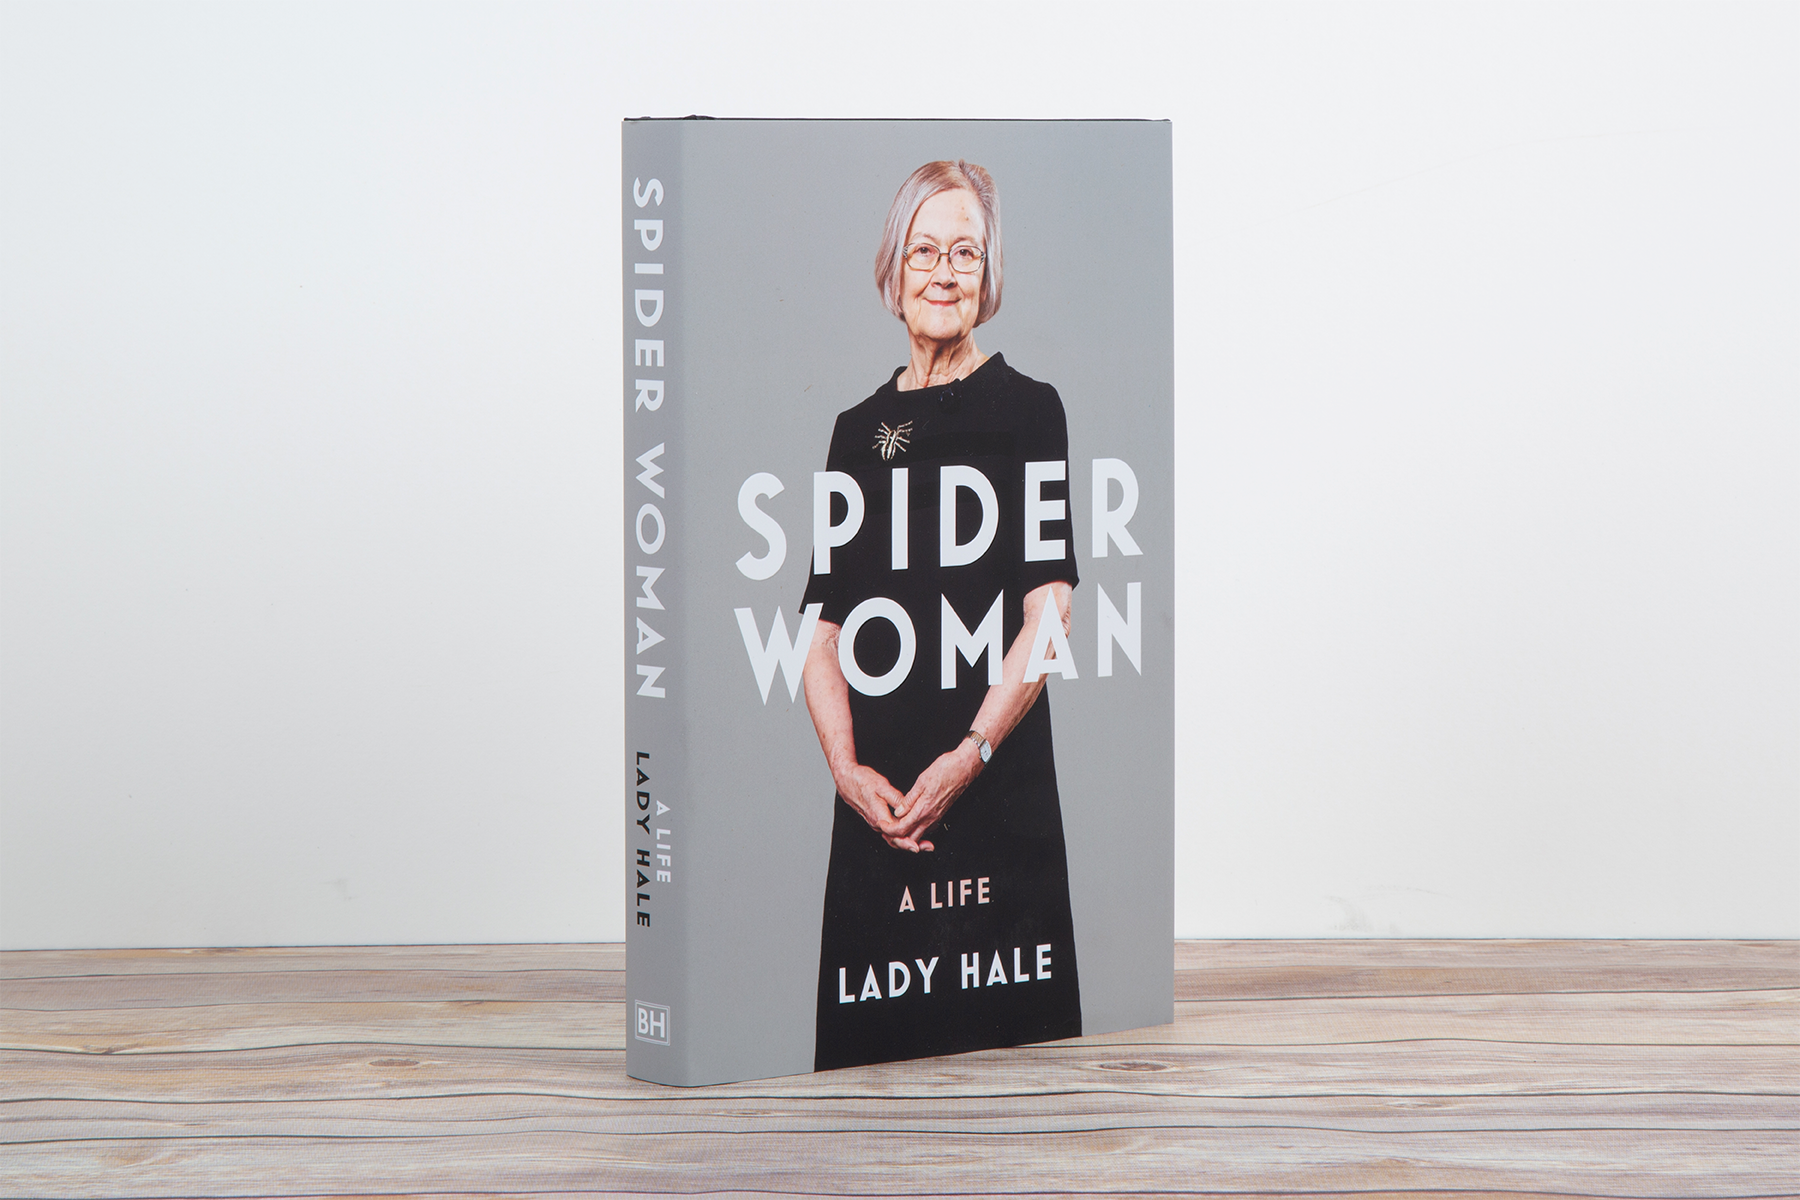 A photo of Lady Hale's memoir 'Spider Woman' on a wood surface against a light grey background.